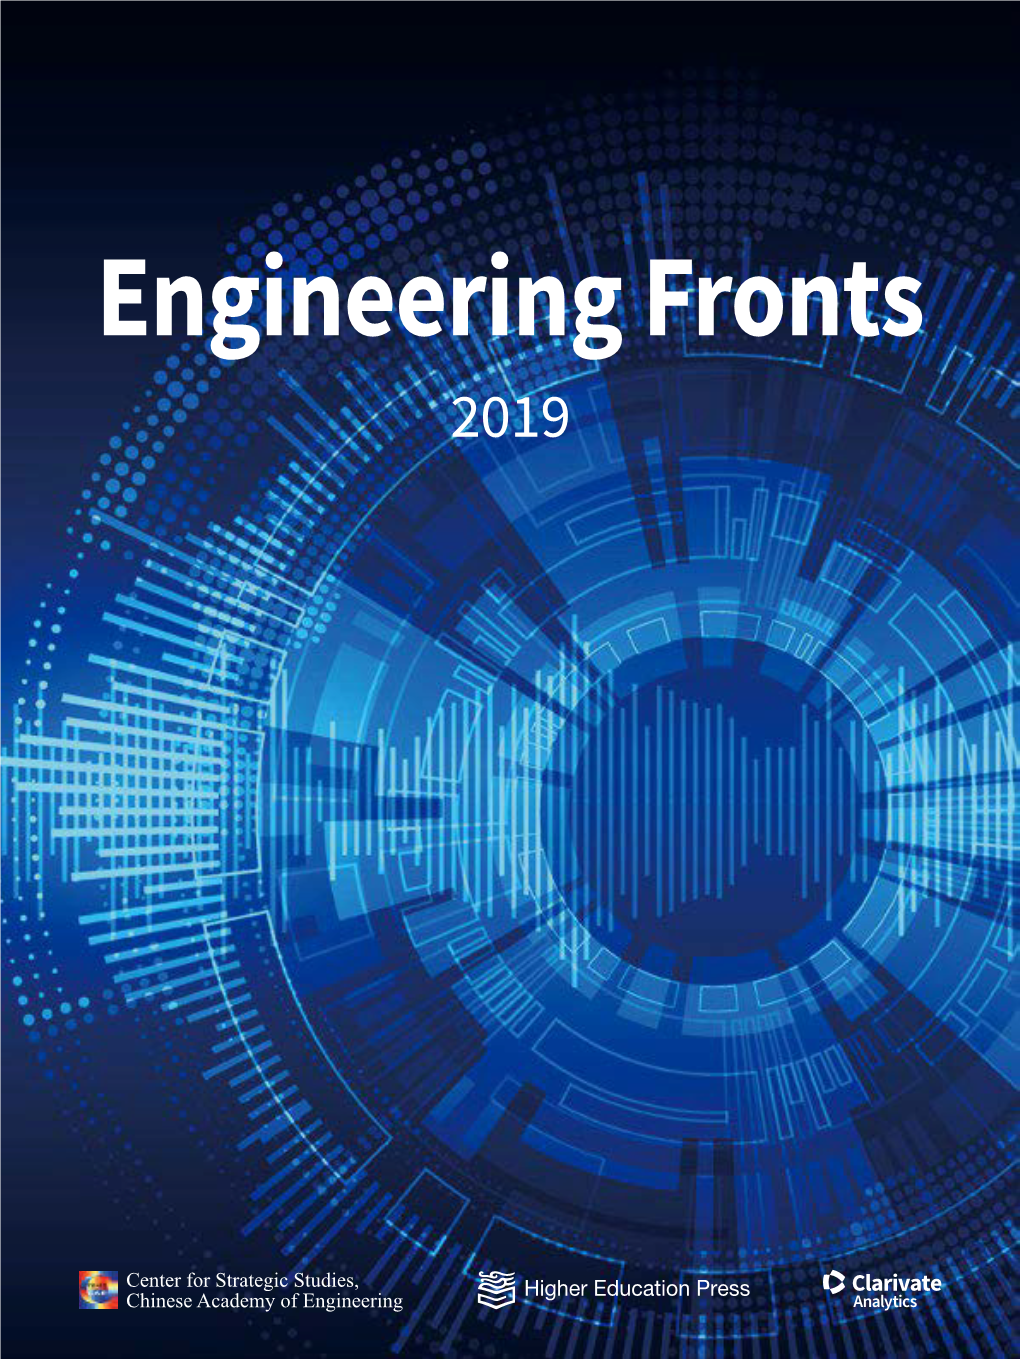 Engineering Fronts 2019